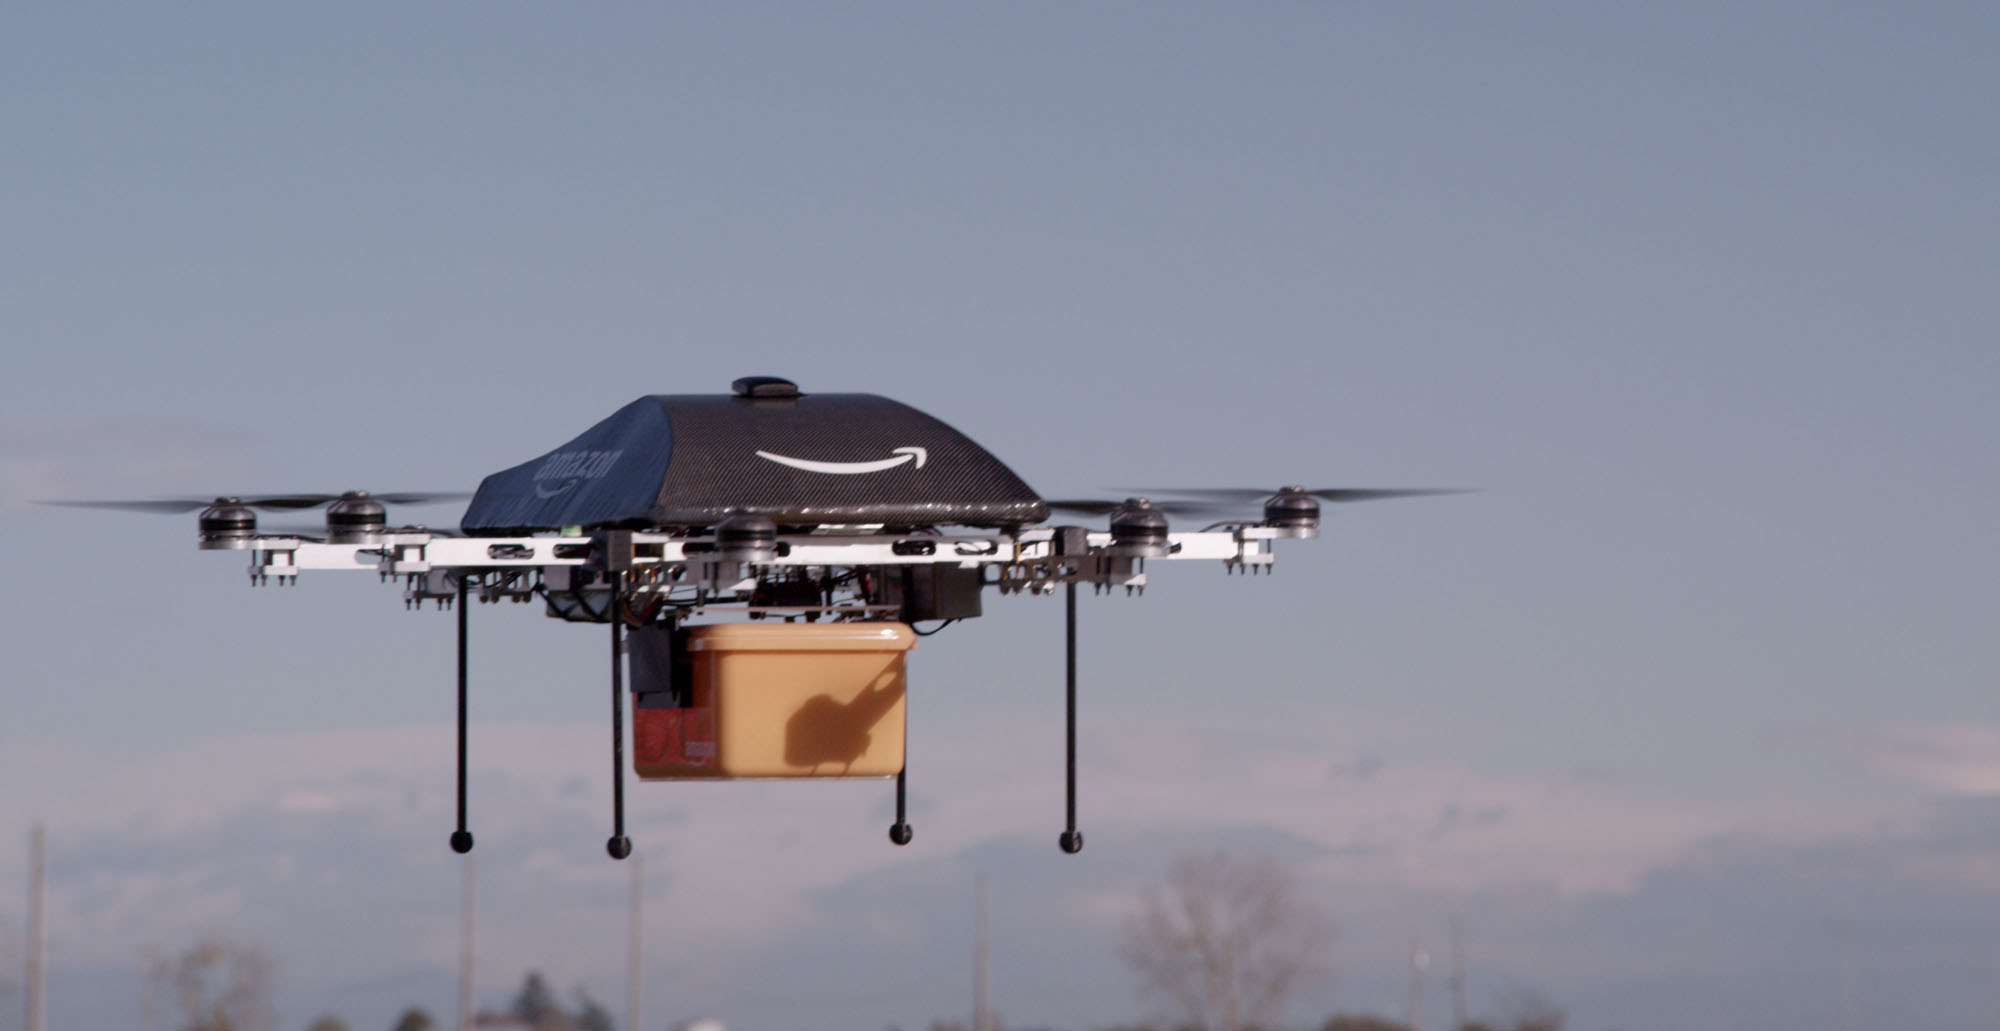 Package Delivery in Minutes Via Drone Super Highway In The Skies